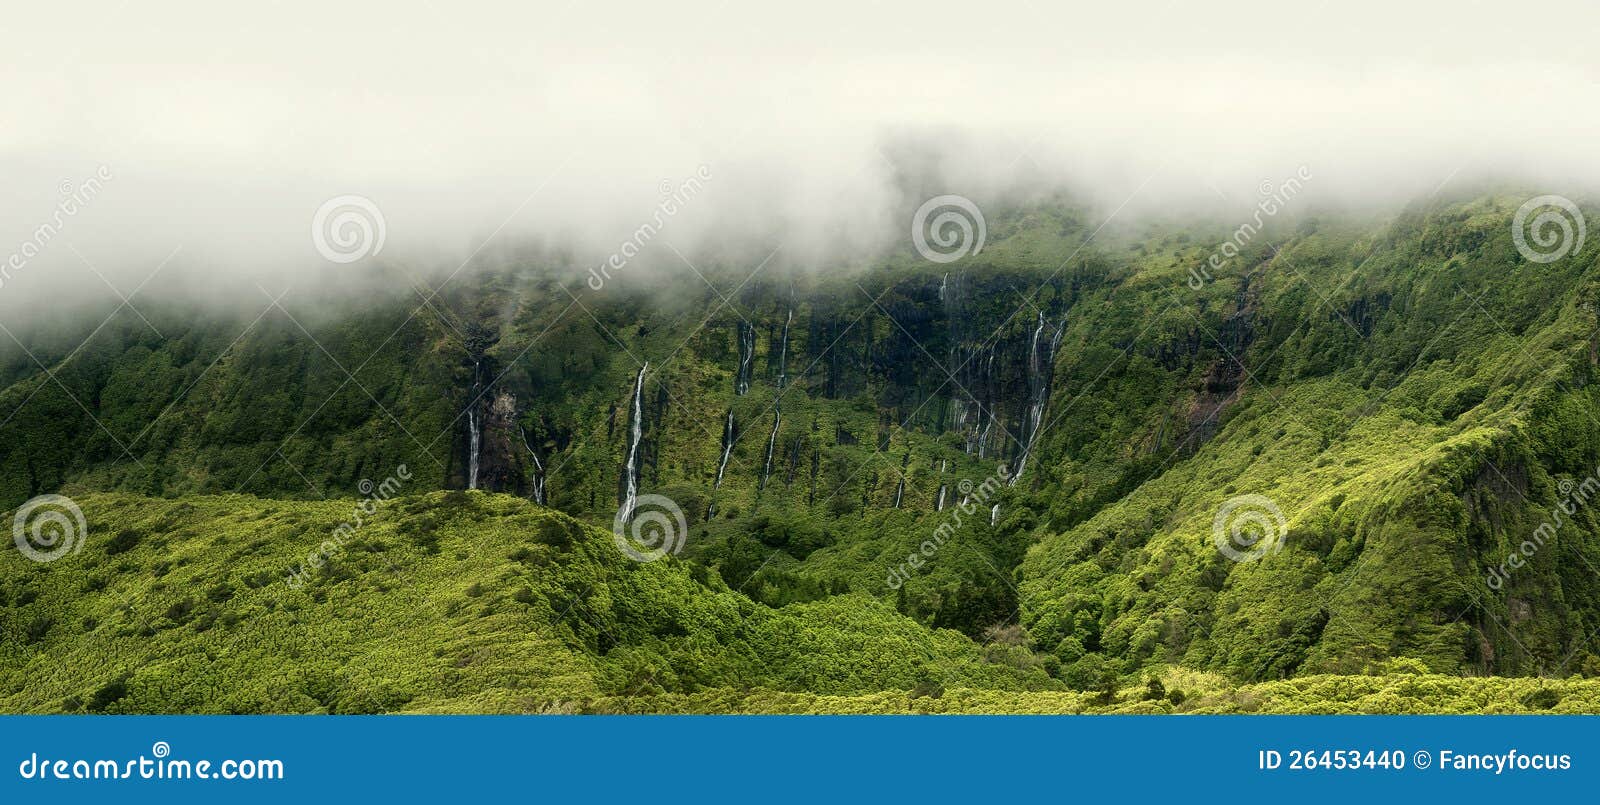 cloudy mountains of flores, acores islands